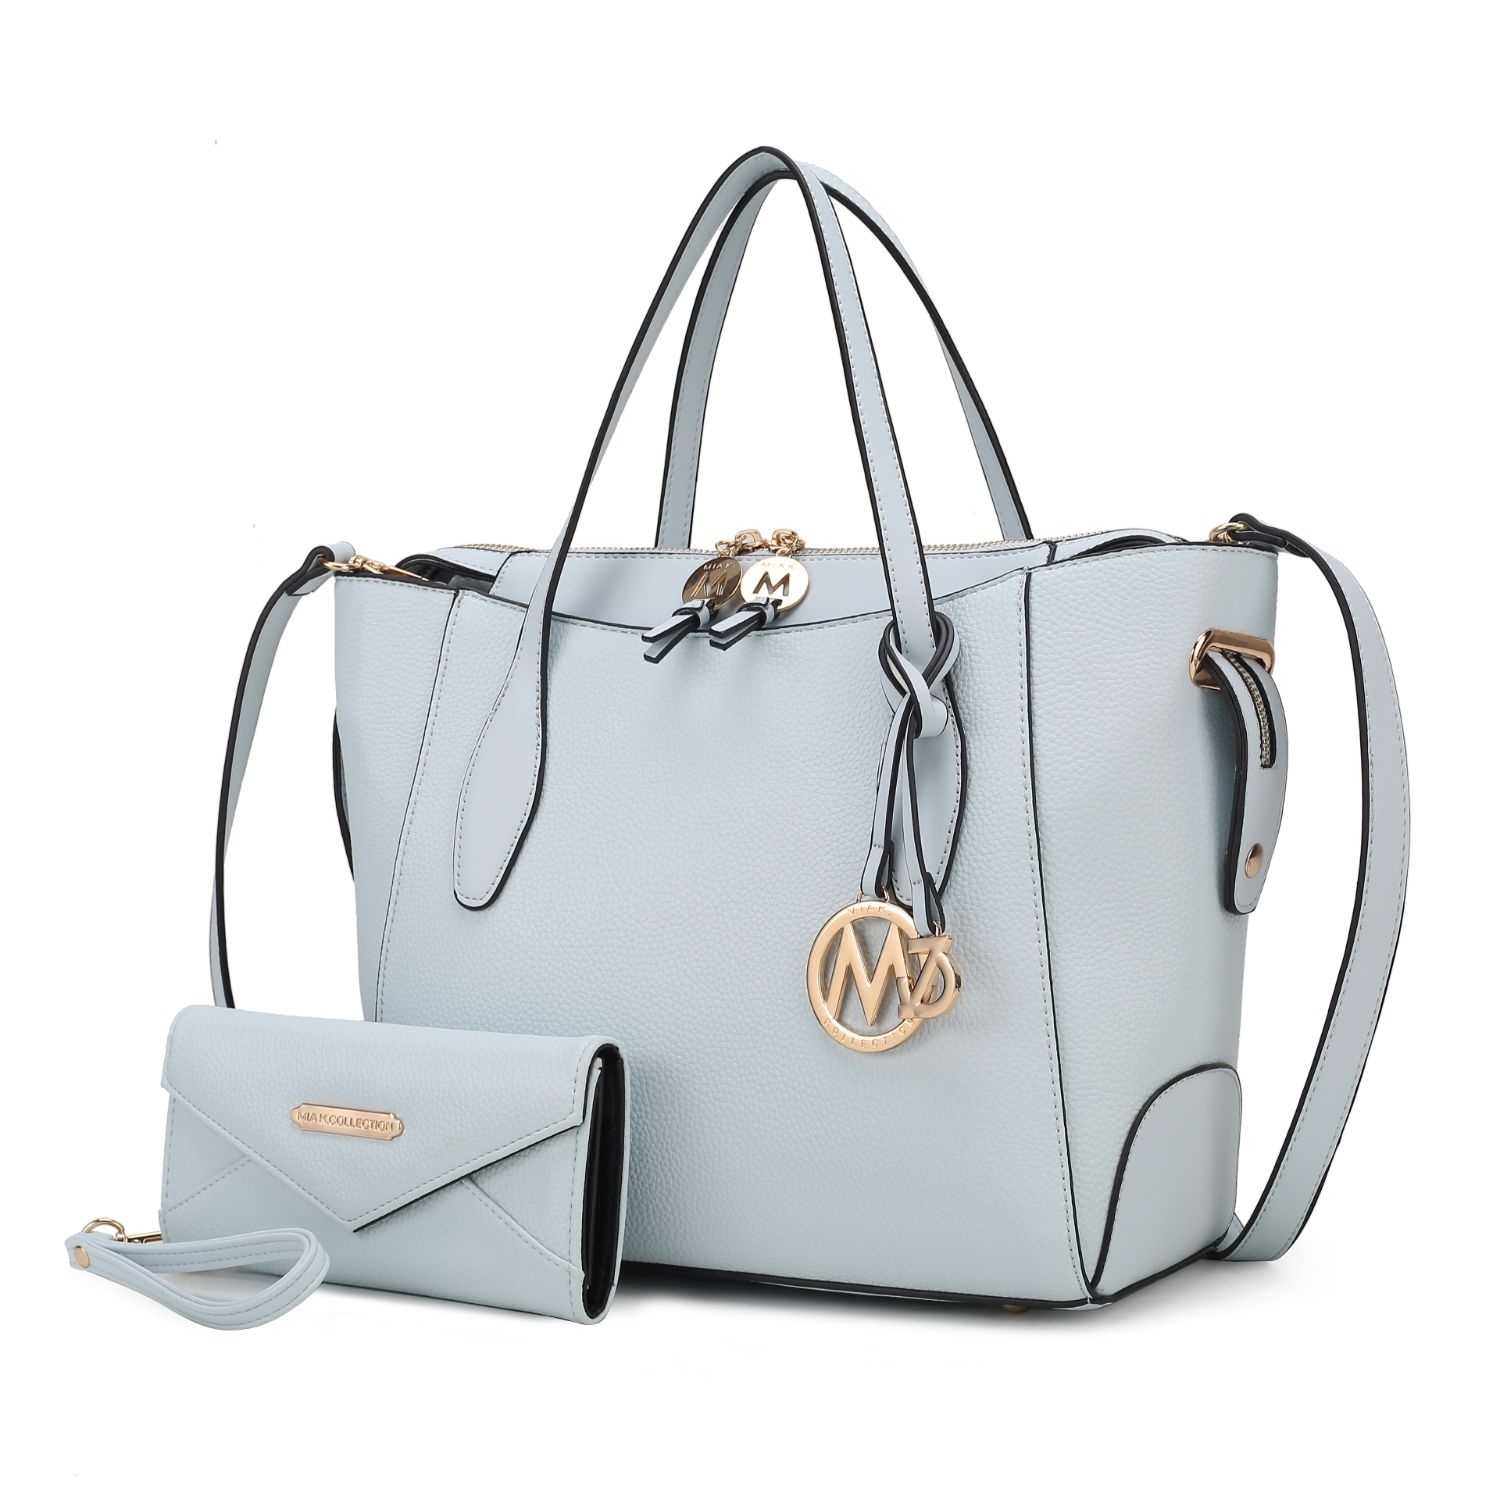 MKF Collection Bruna Vegan Leather Women's Tote Bag With Wallet -2 Pieces By Mia K - Light Blue